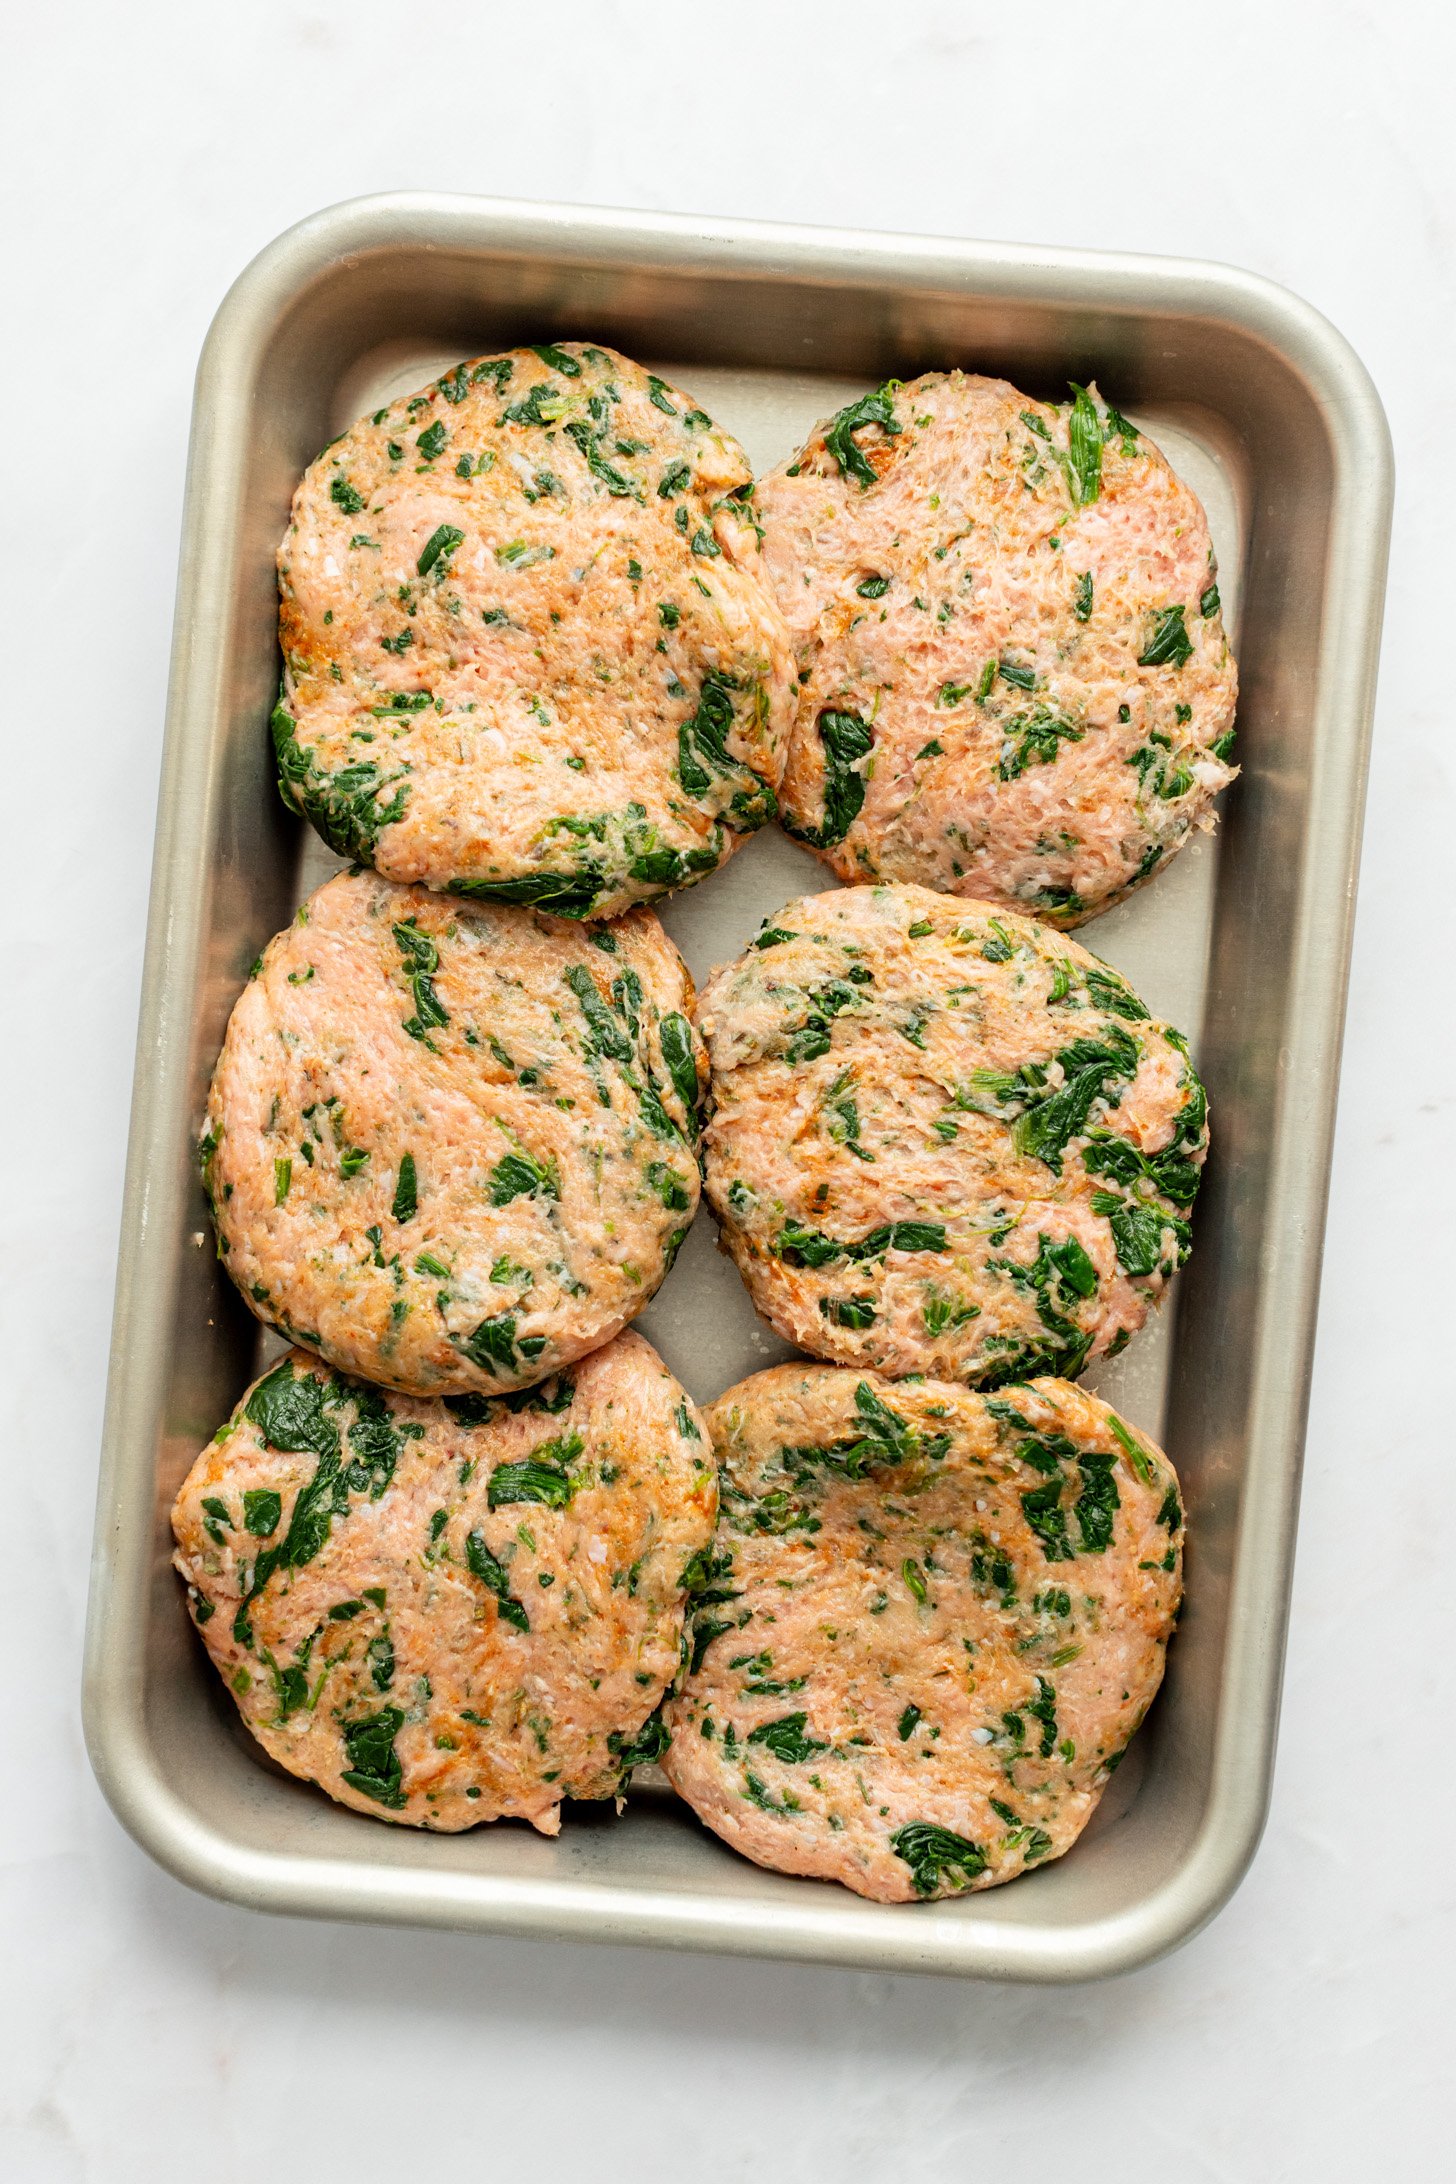 Raw ground turkey mixture for Spinach and Ground Turkey Breakfast Sausages are formed into six patties on a baking sheet sitting on a white countertop.